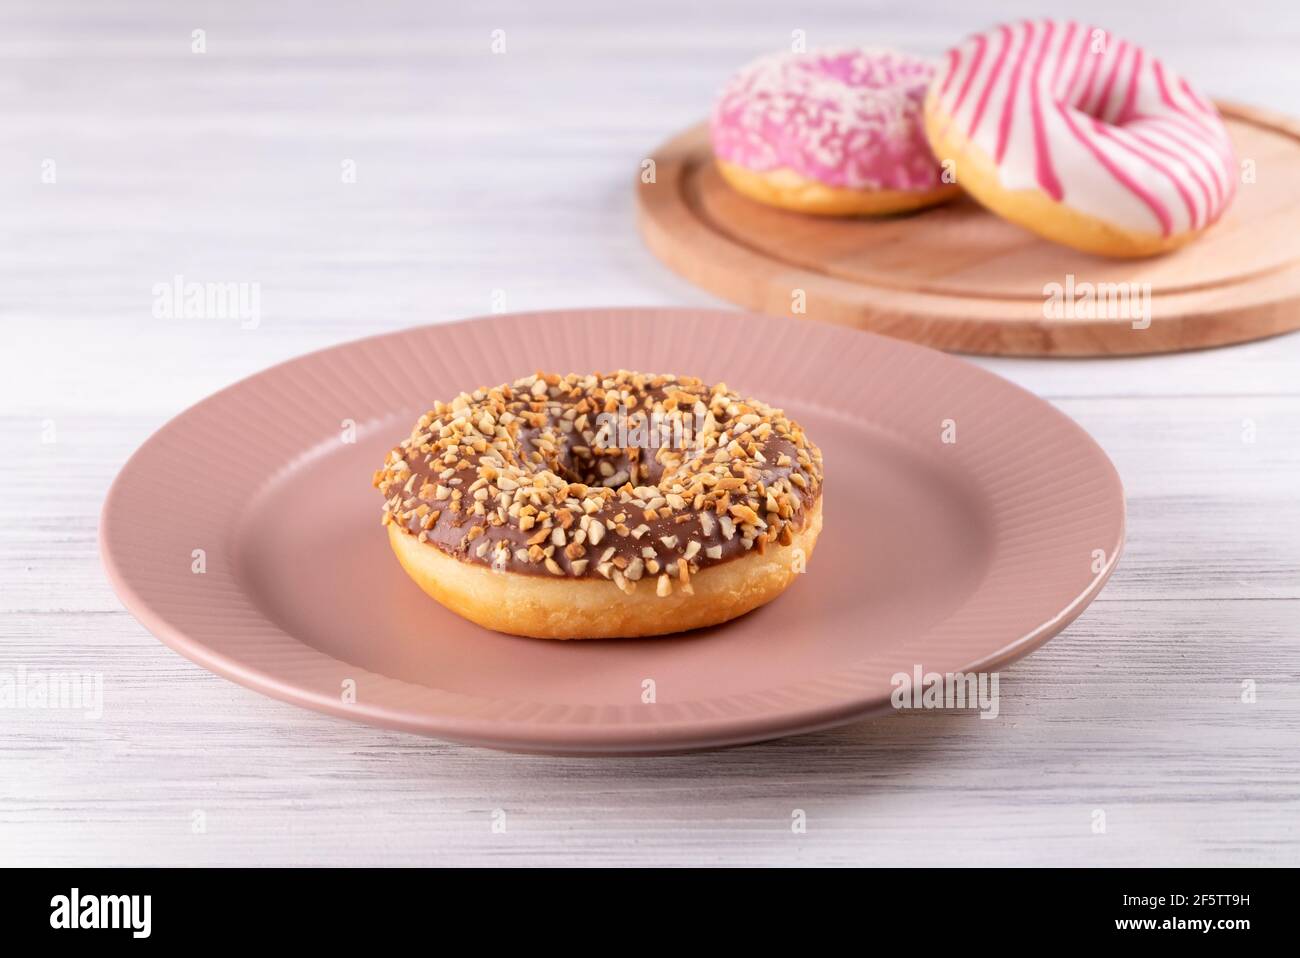 Three sugar-coated donuts lie on a pink ceramic plate and a wooden cutting board. Stock Photo